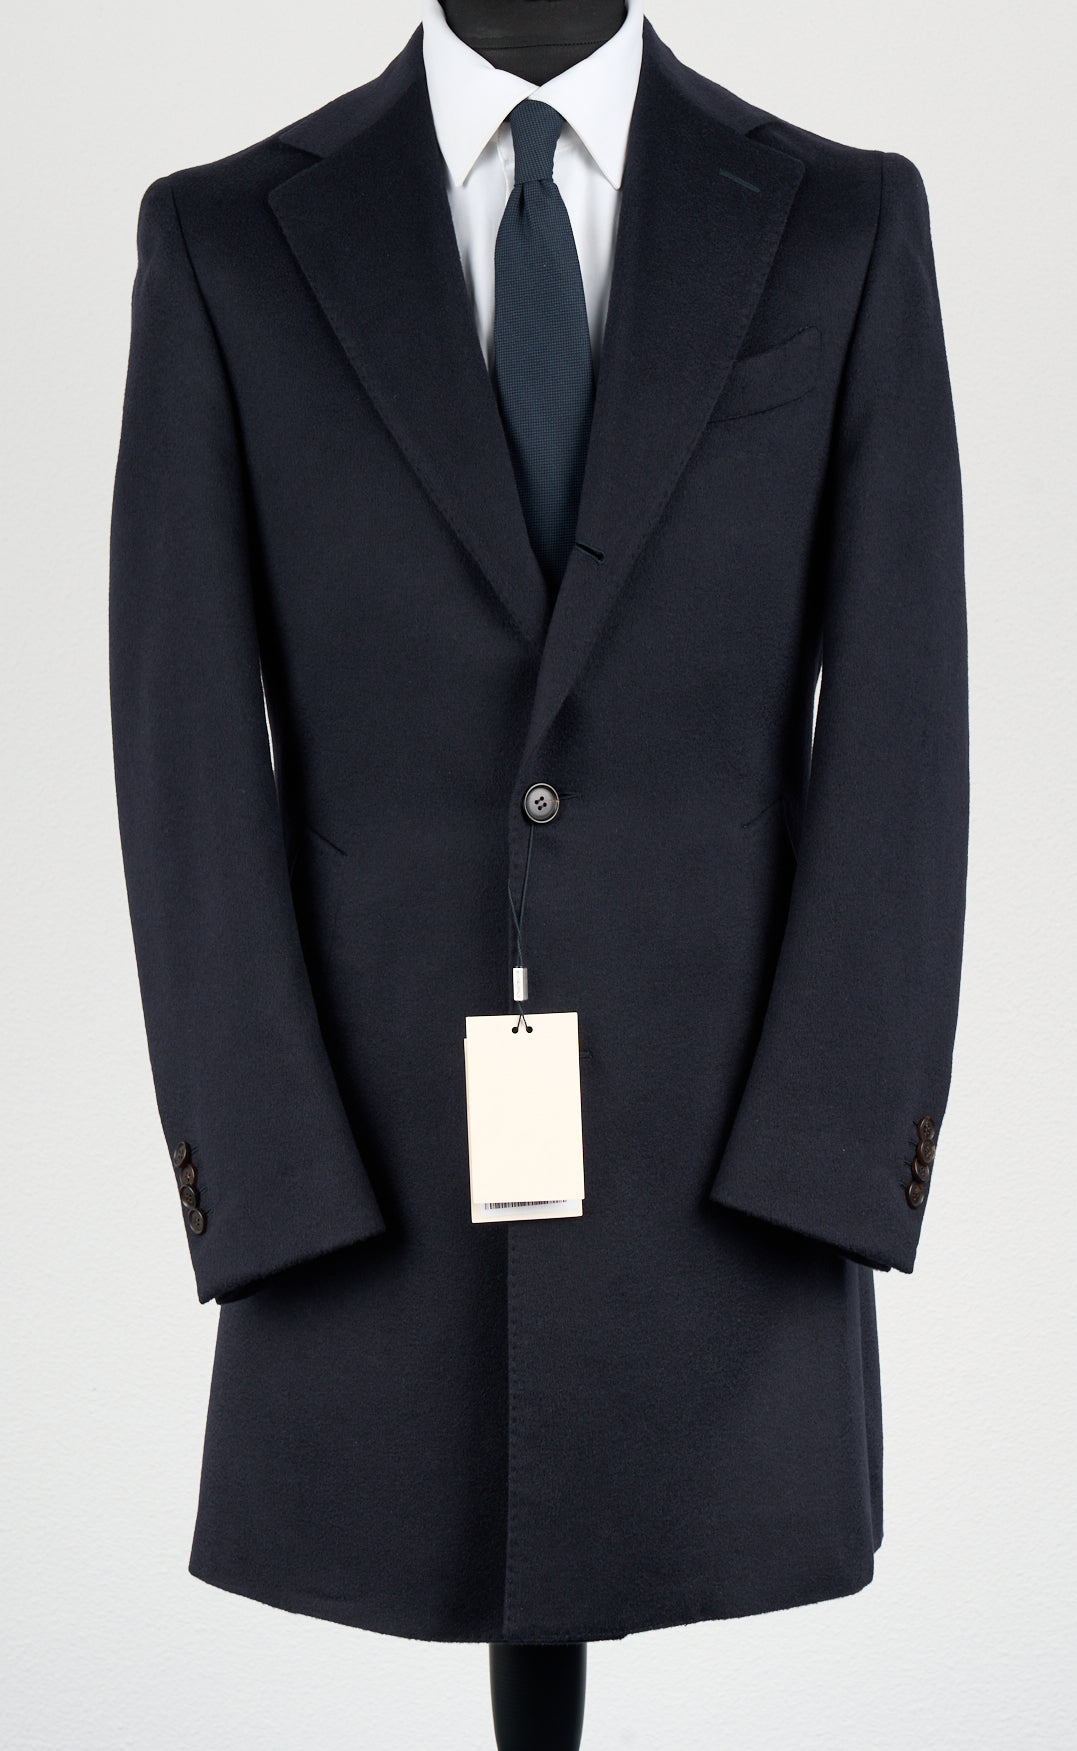 New Suitsupply Vincenza Navy Blue Pure Cashmere Coat - Size 36R